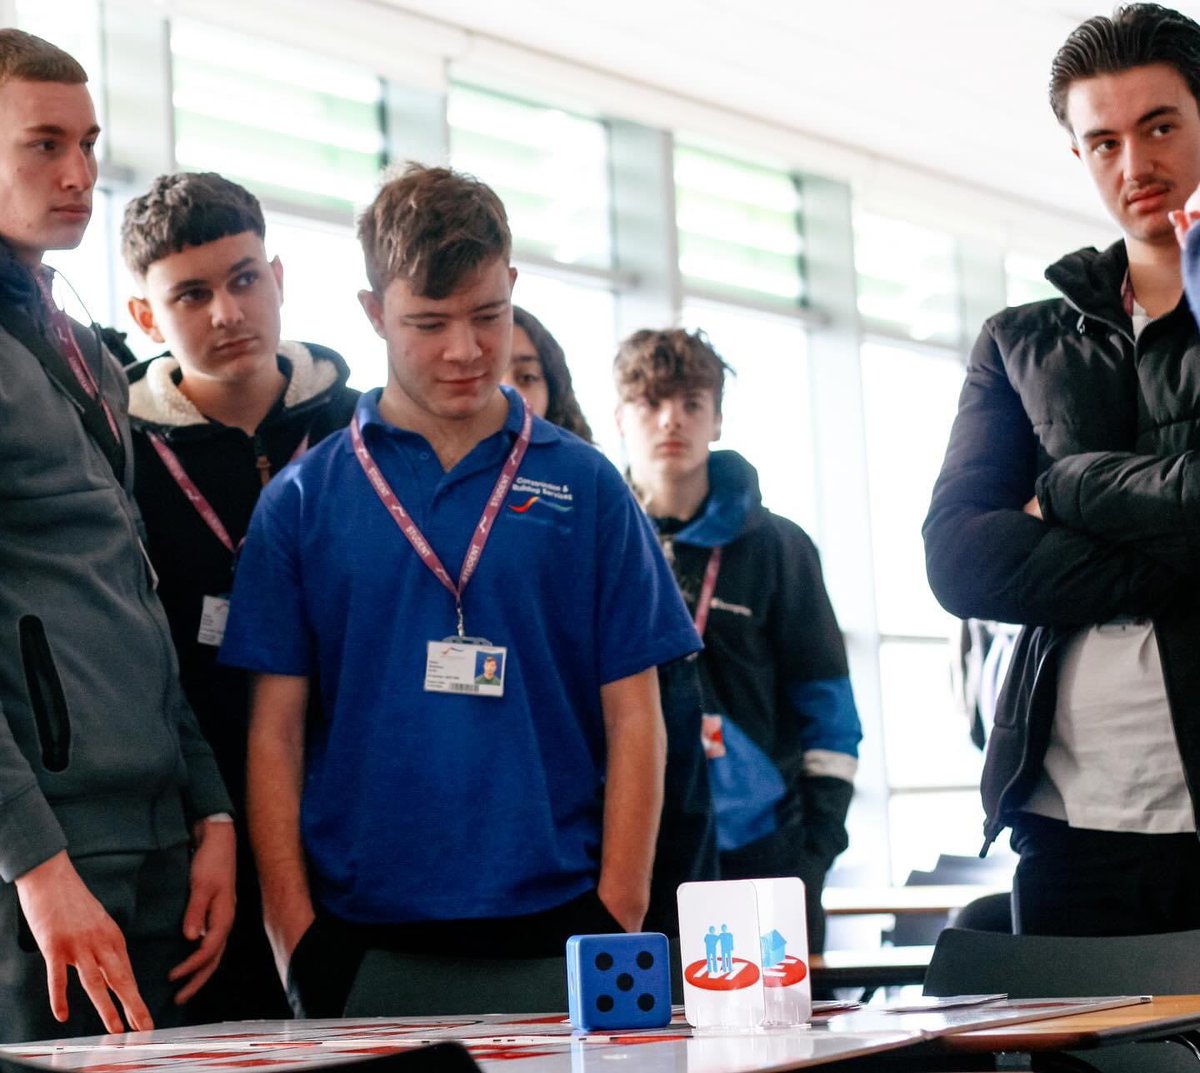 Repairs and Maintenance company Mears, visited Thurrock College today to talk to students about the advantages of apprenticeships and play some games. Current apprentice at Mears, Riley spoke to students about his experiences and why they should consider going down that path.